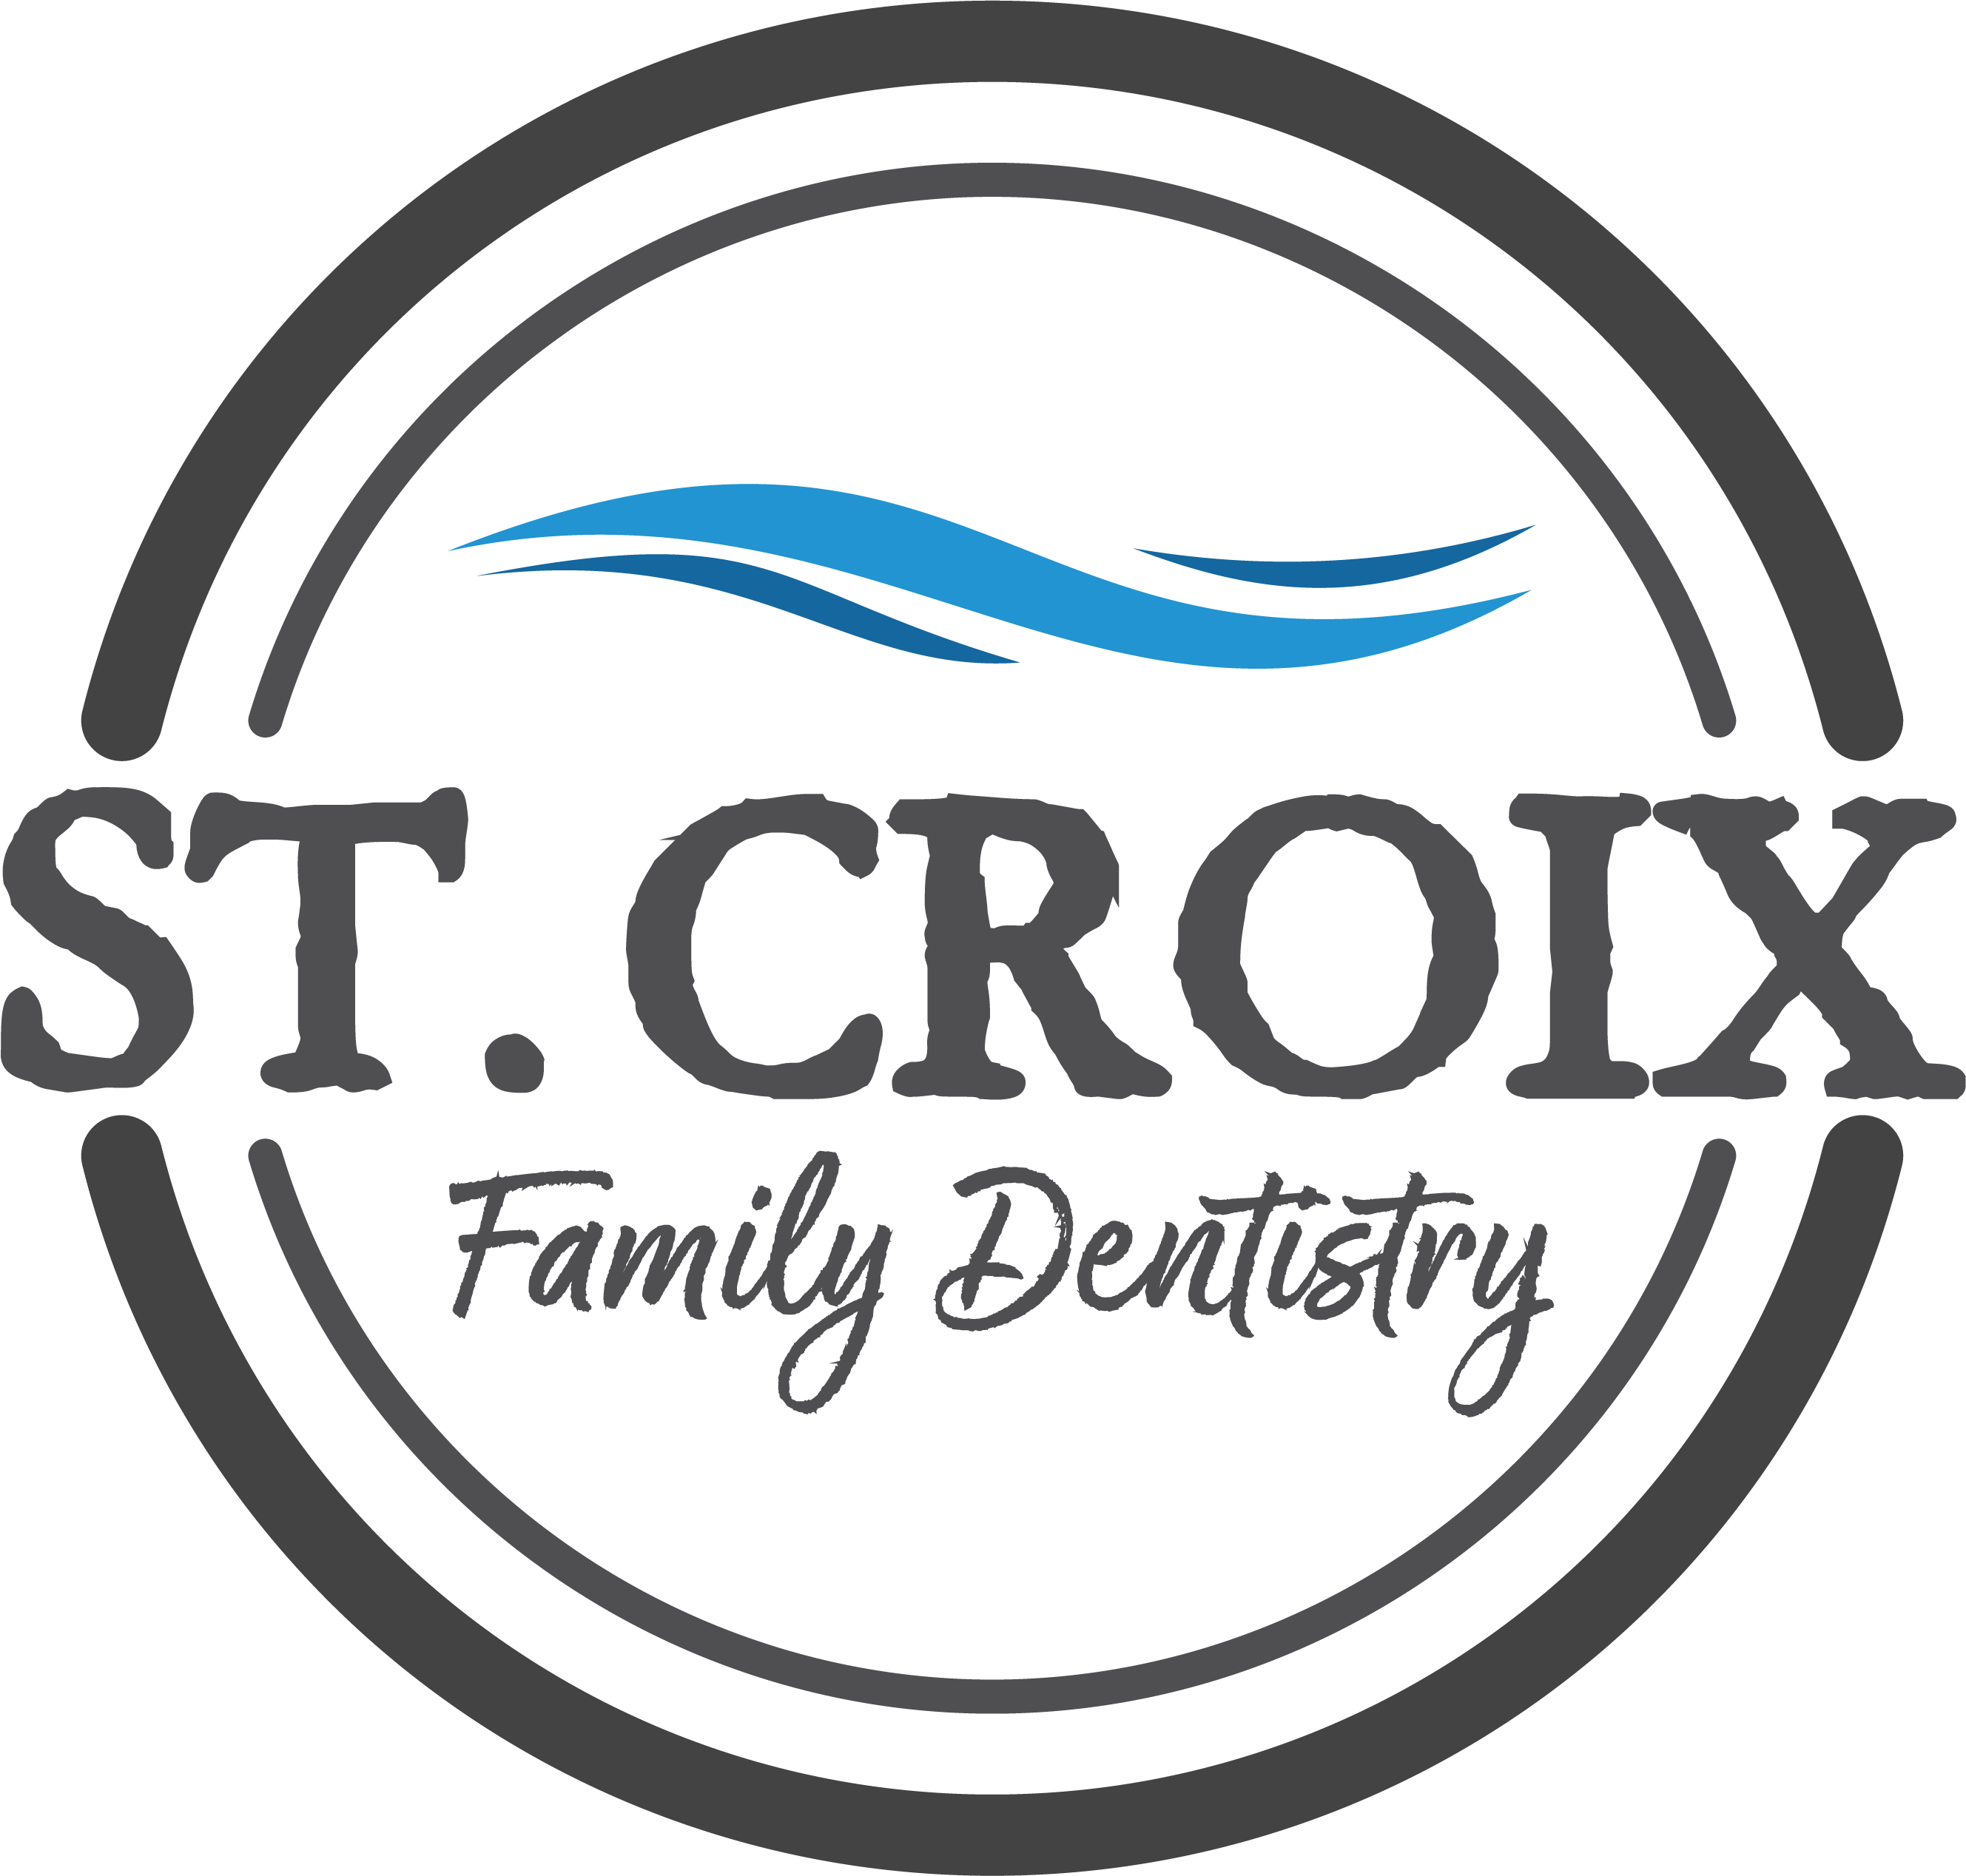 St. Croix Family Dentistry